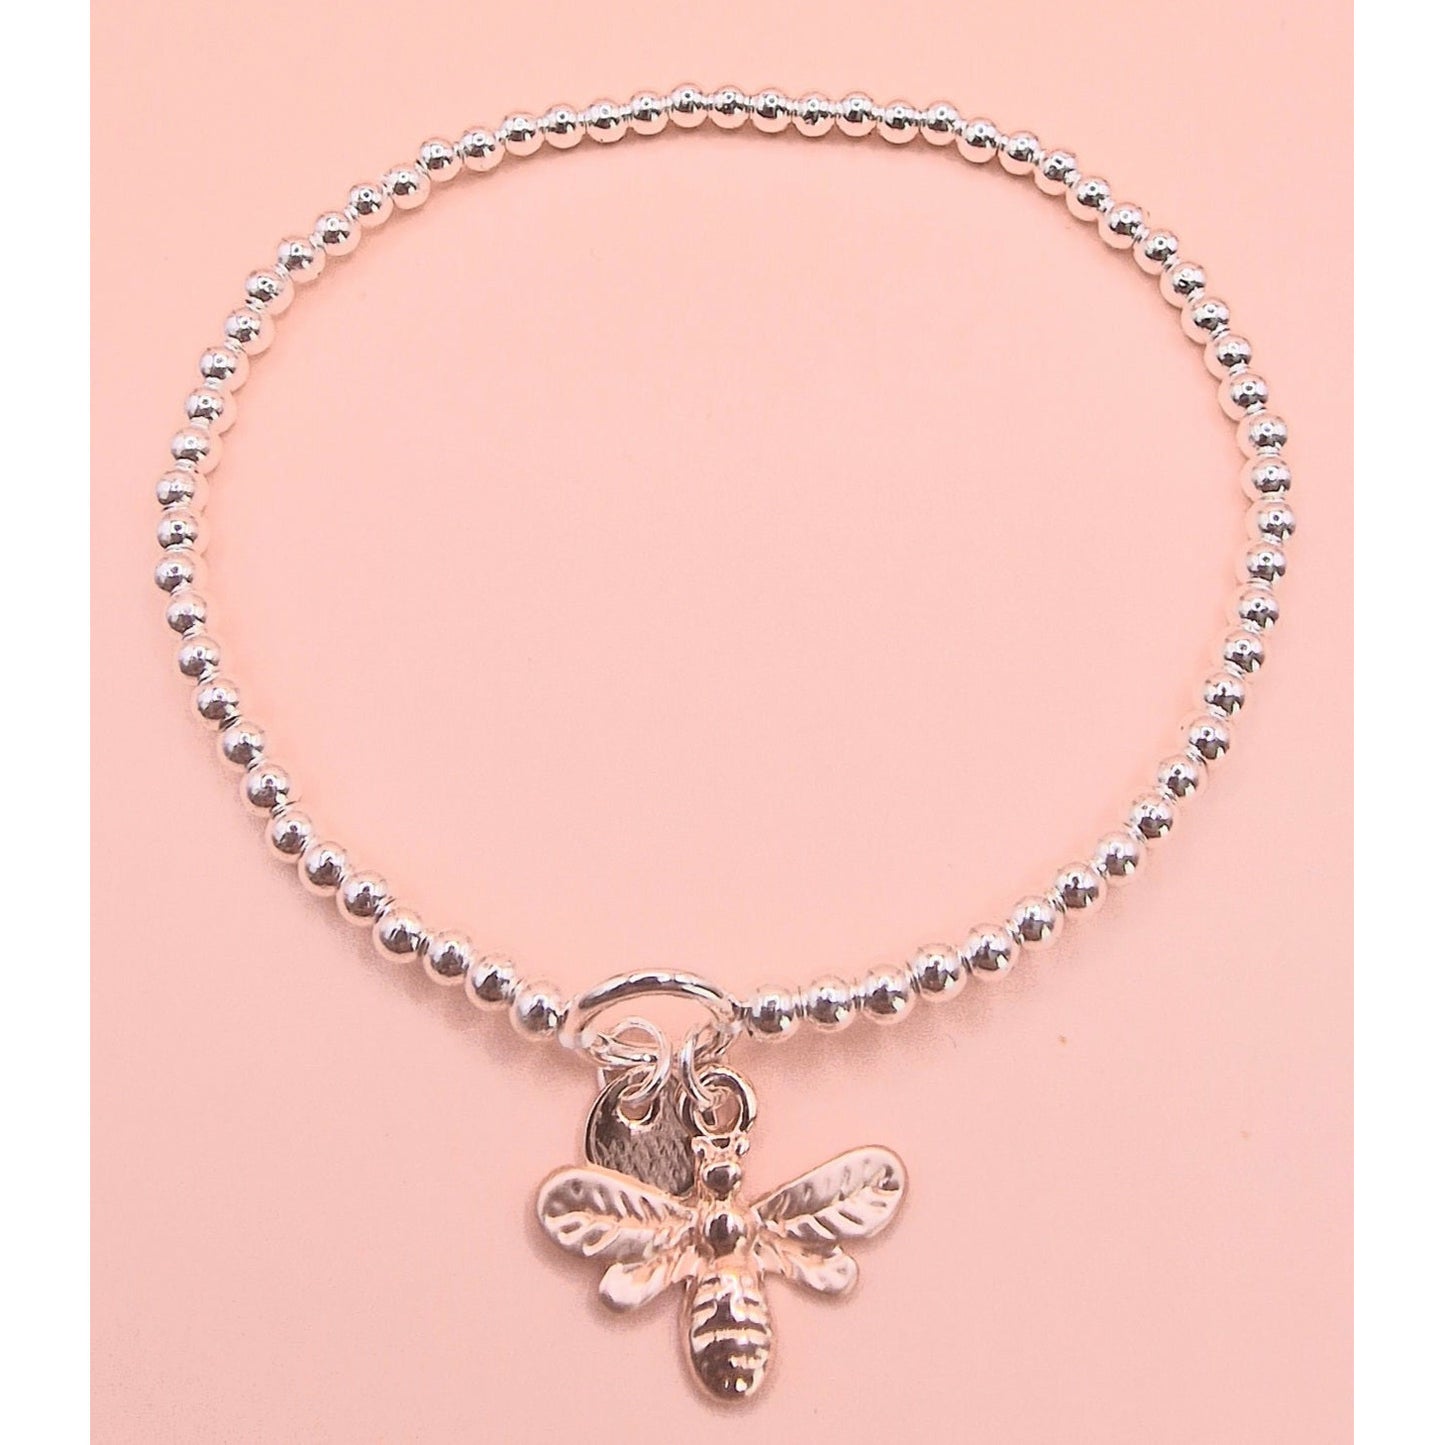 Delicate Bumble Bee Stretch Charm Bracelet Silver - Rose Gold Colour